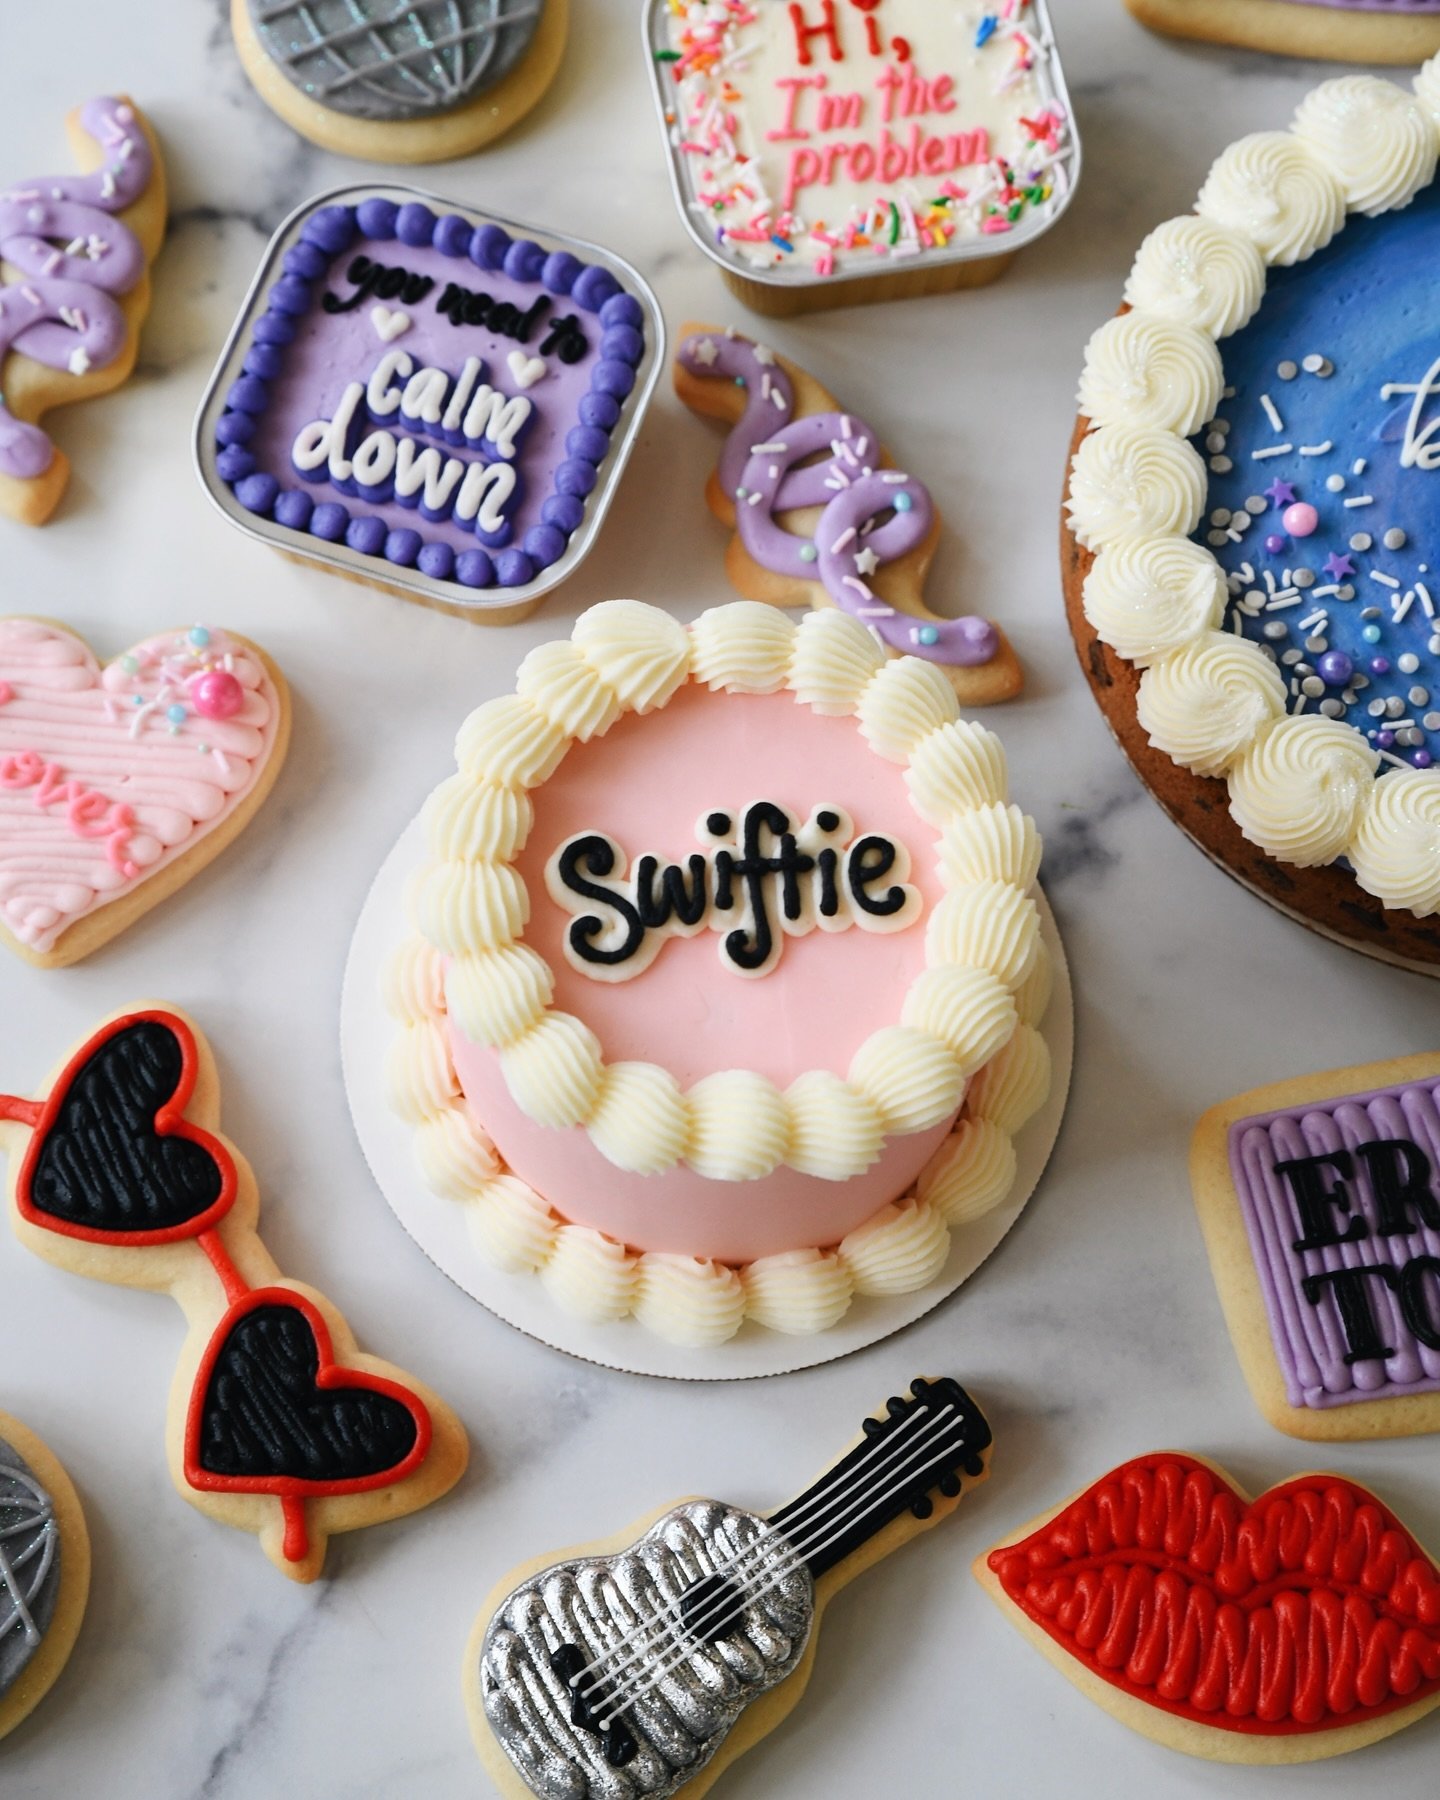 ⏳Swifties, who&rsquo;s counting down with us? We&rsquo;ll have Taylor treats in the store through Saturday to celebrate the release of TTPD!🫶

The bakeshop is open 10am to 4pm.